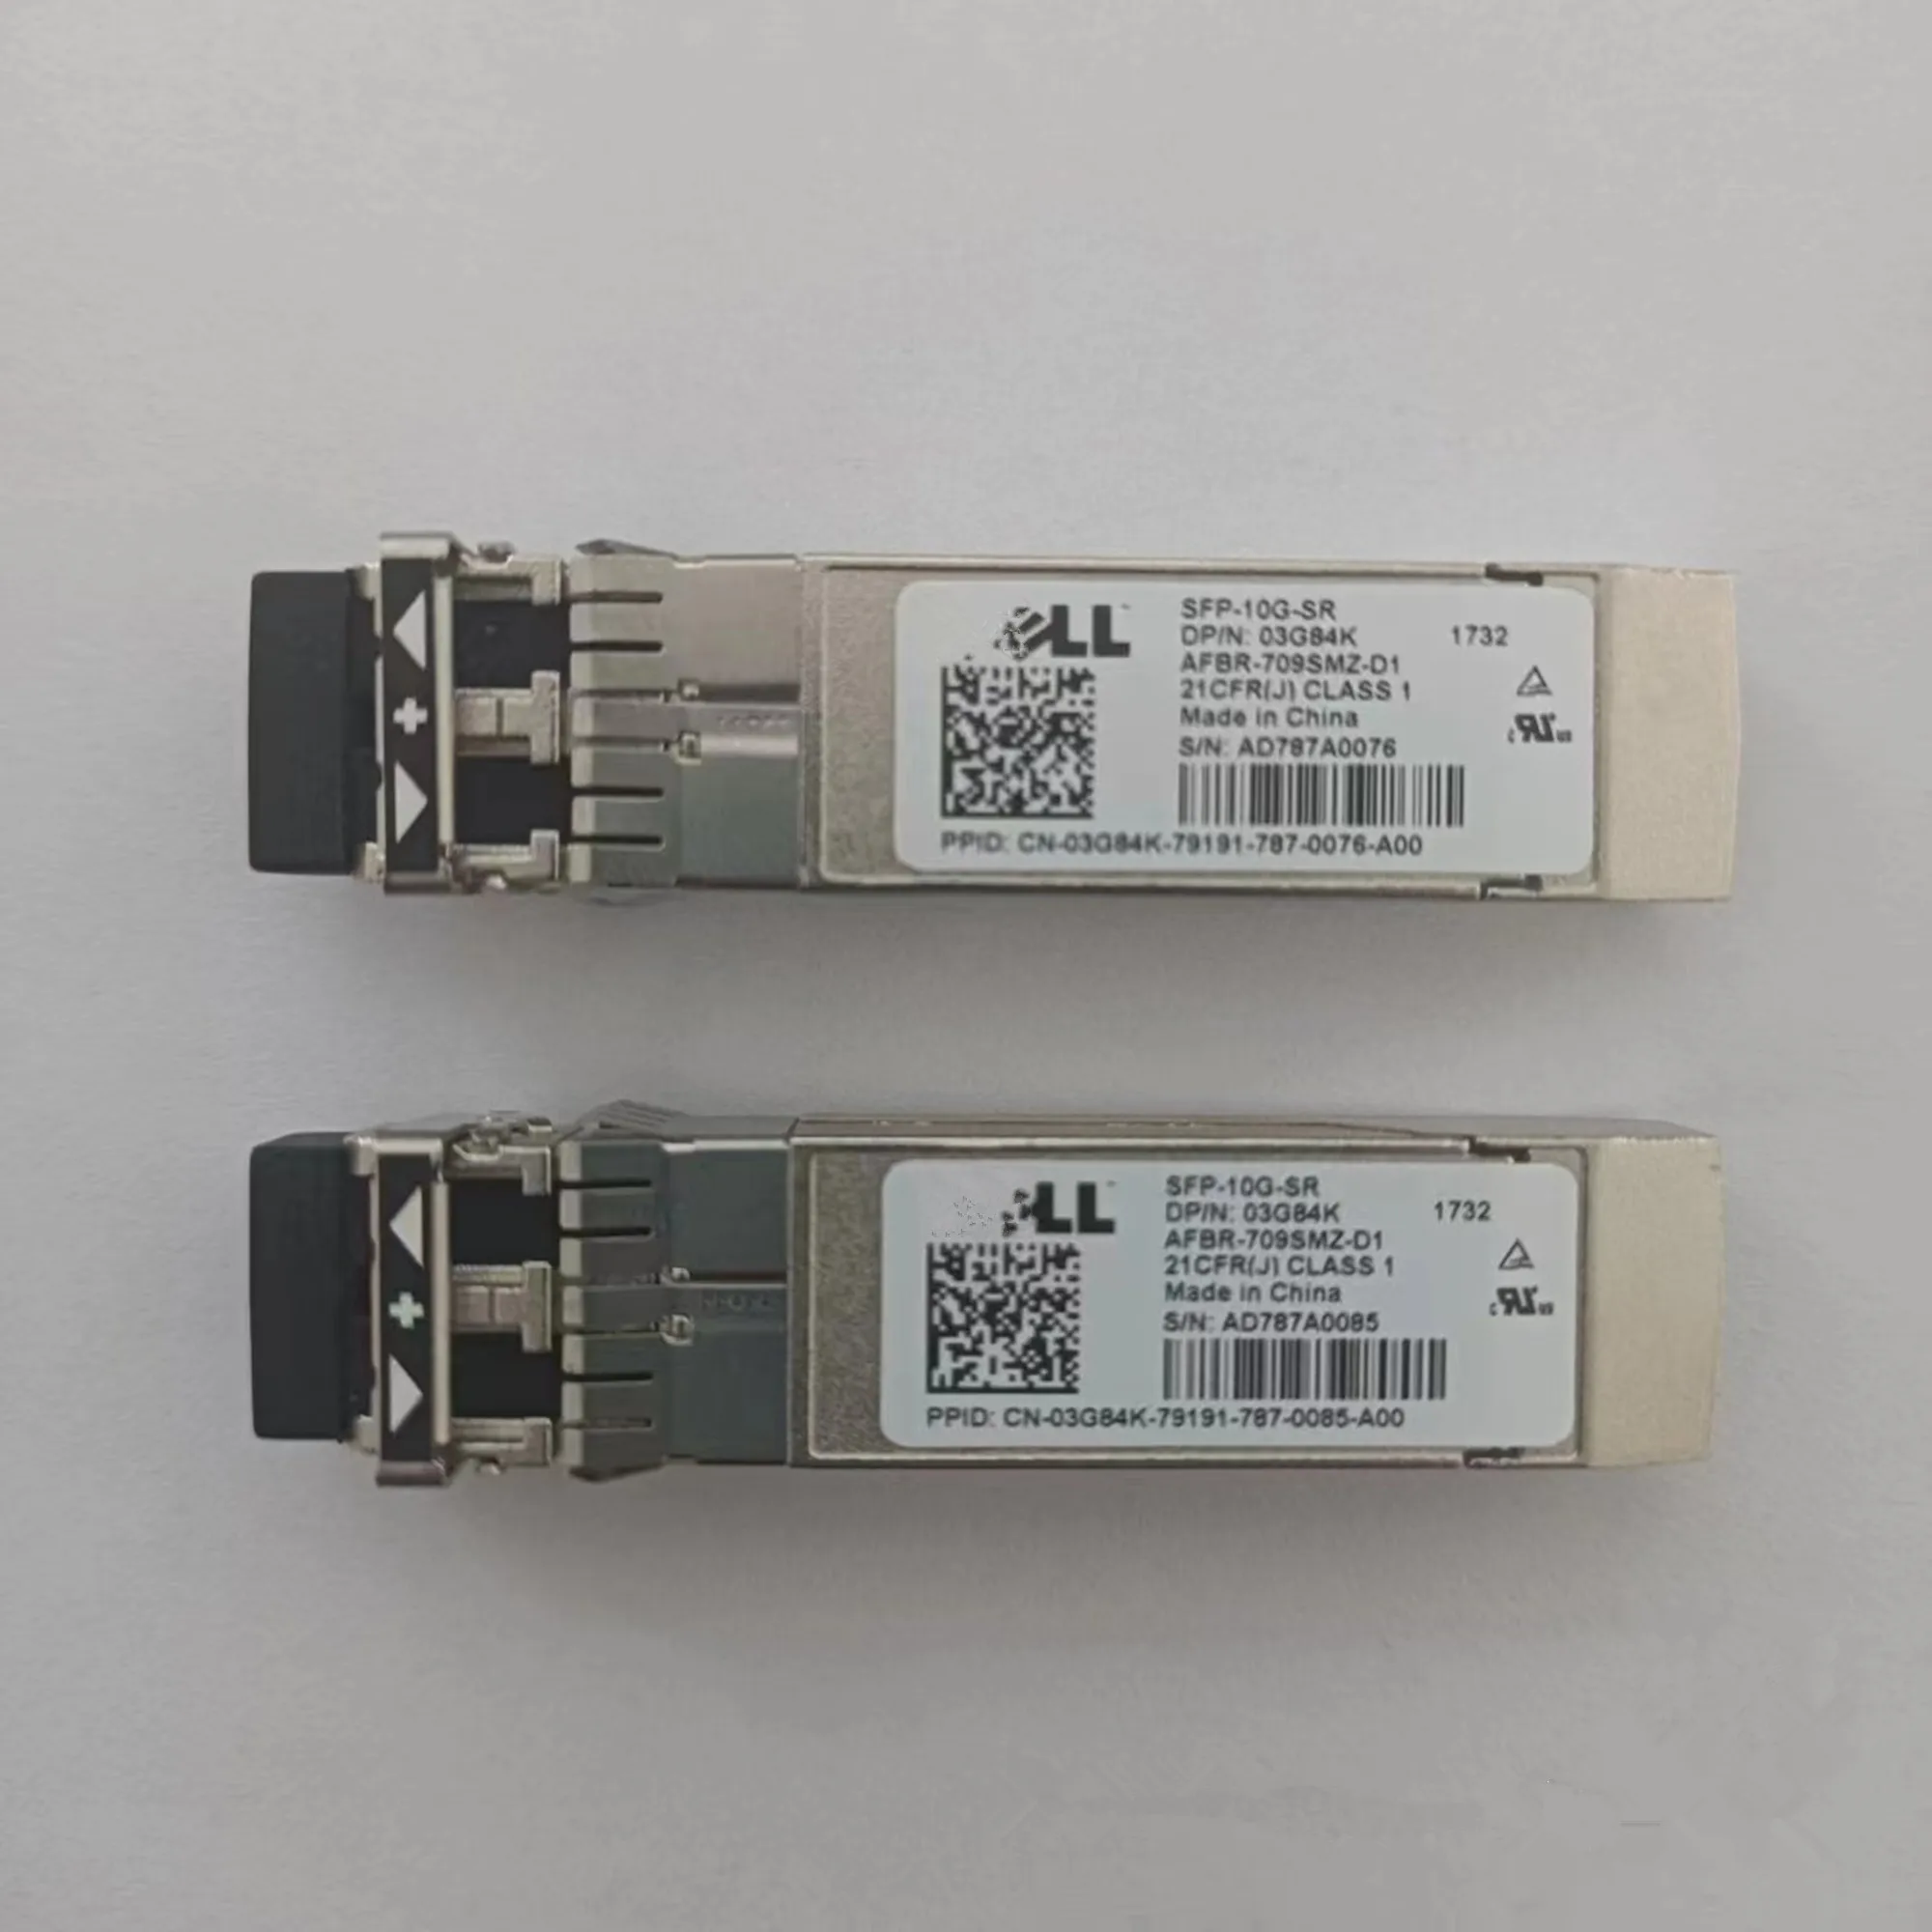 Del-I/AFBR-709SMZ-D1/03G84K/SFP-10G-SR/10Gbase-SR/850nm 300m 10g Transceiver/10g network adapter general switch avago transceiver 10g sfp afbr 709smz 10g 850nm lc lc sfp switch 10g network adapter general sfp 10g sr fiber avago 10g sfp